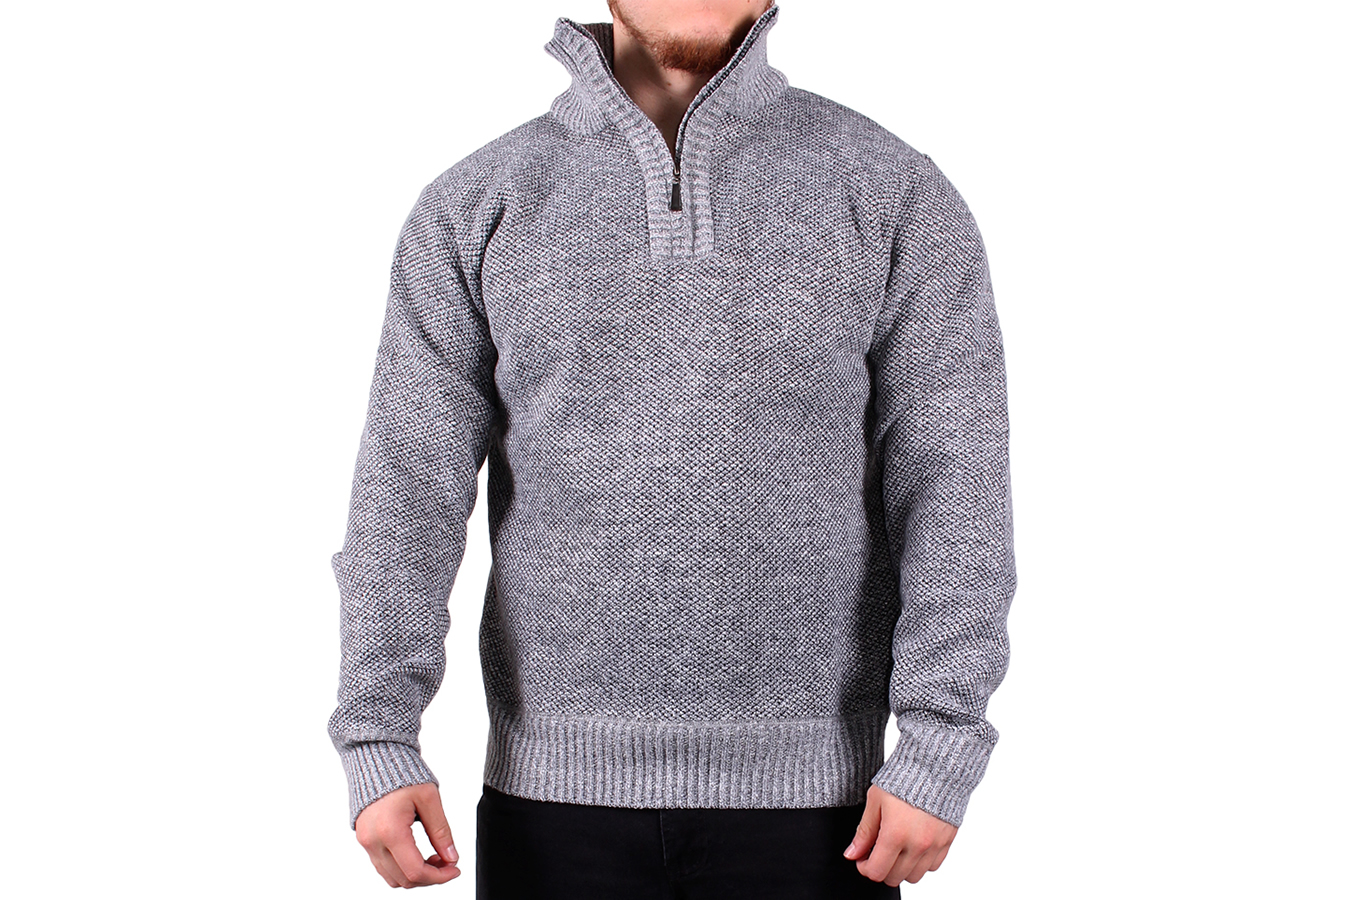 Stillwater Supply Lined 1/4 Zip Pullover Sweater | Vance Outdoors